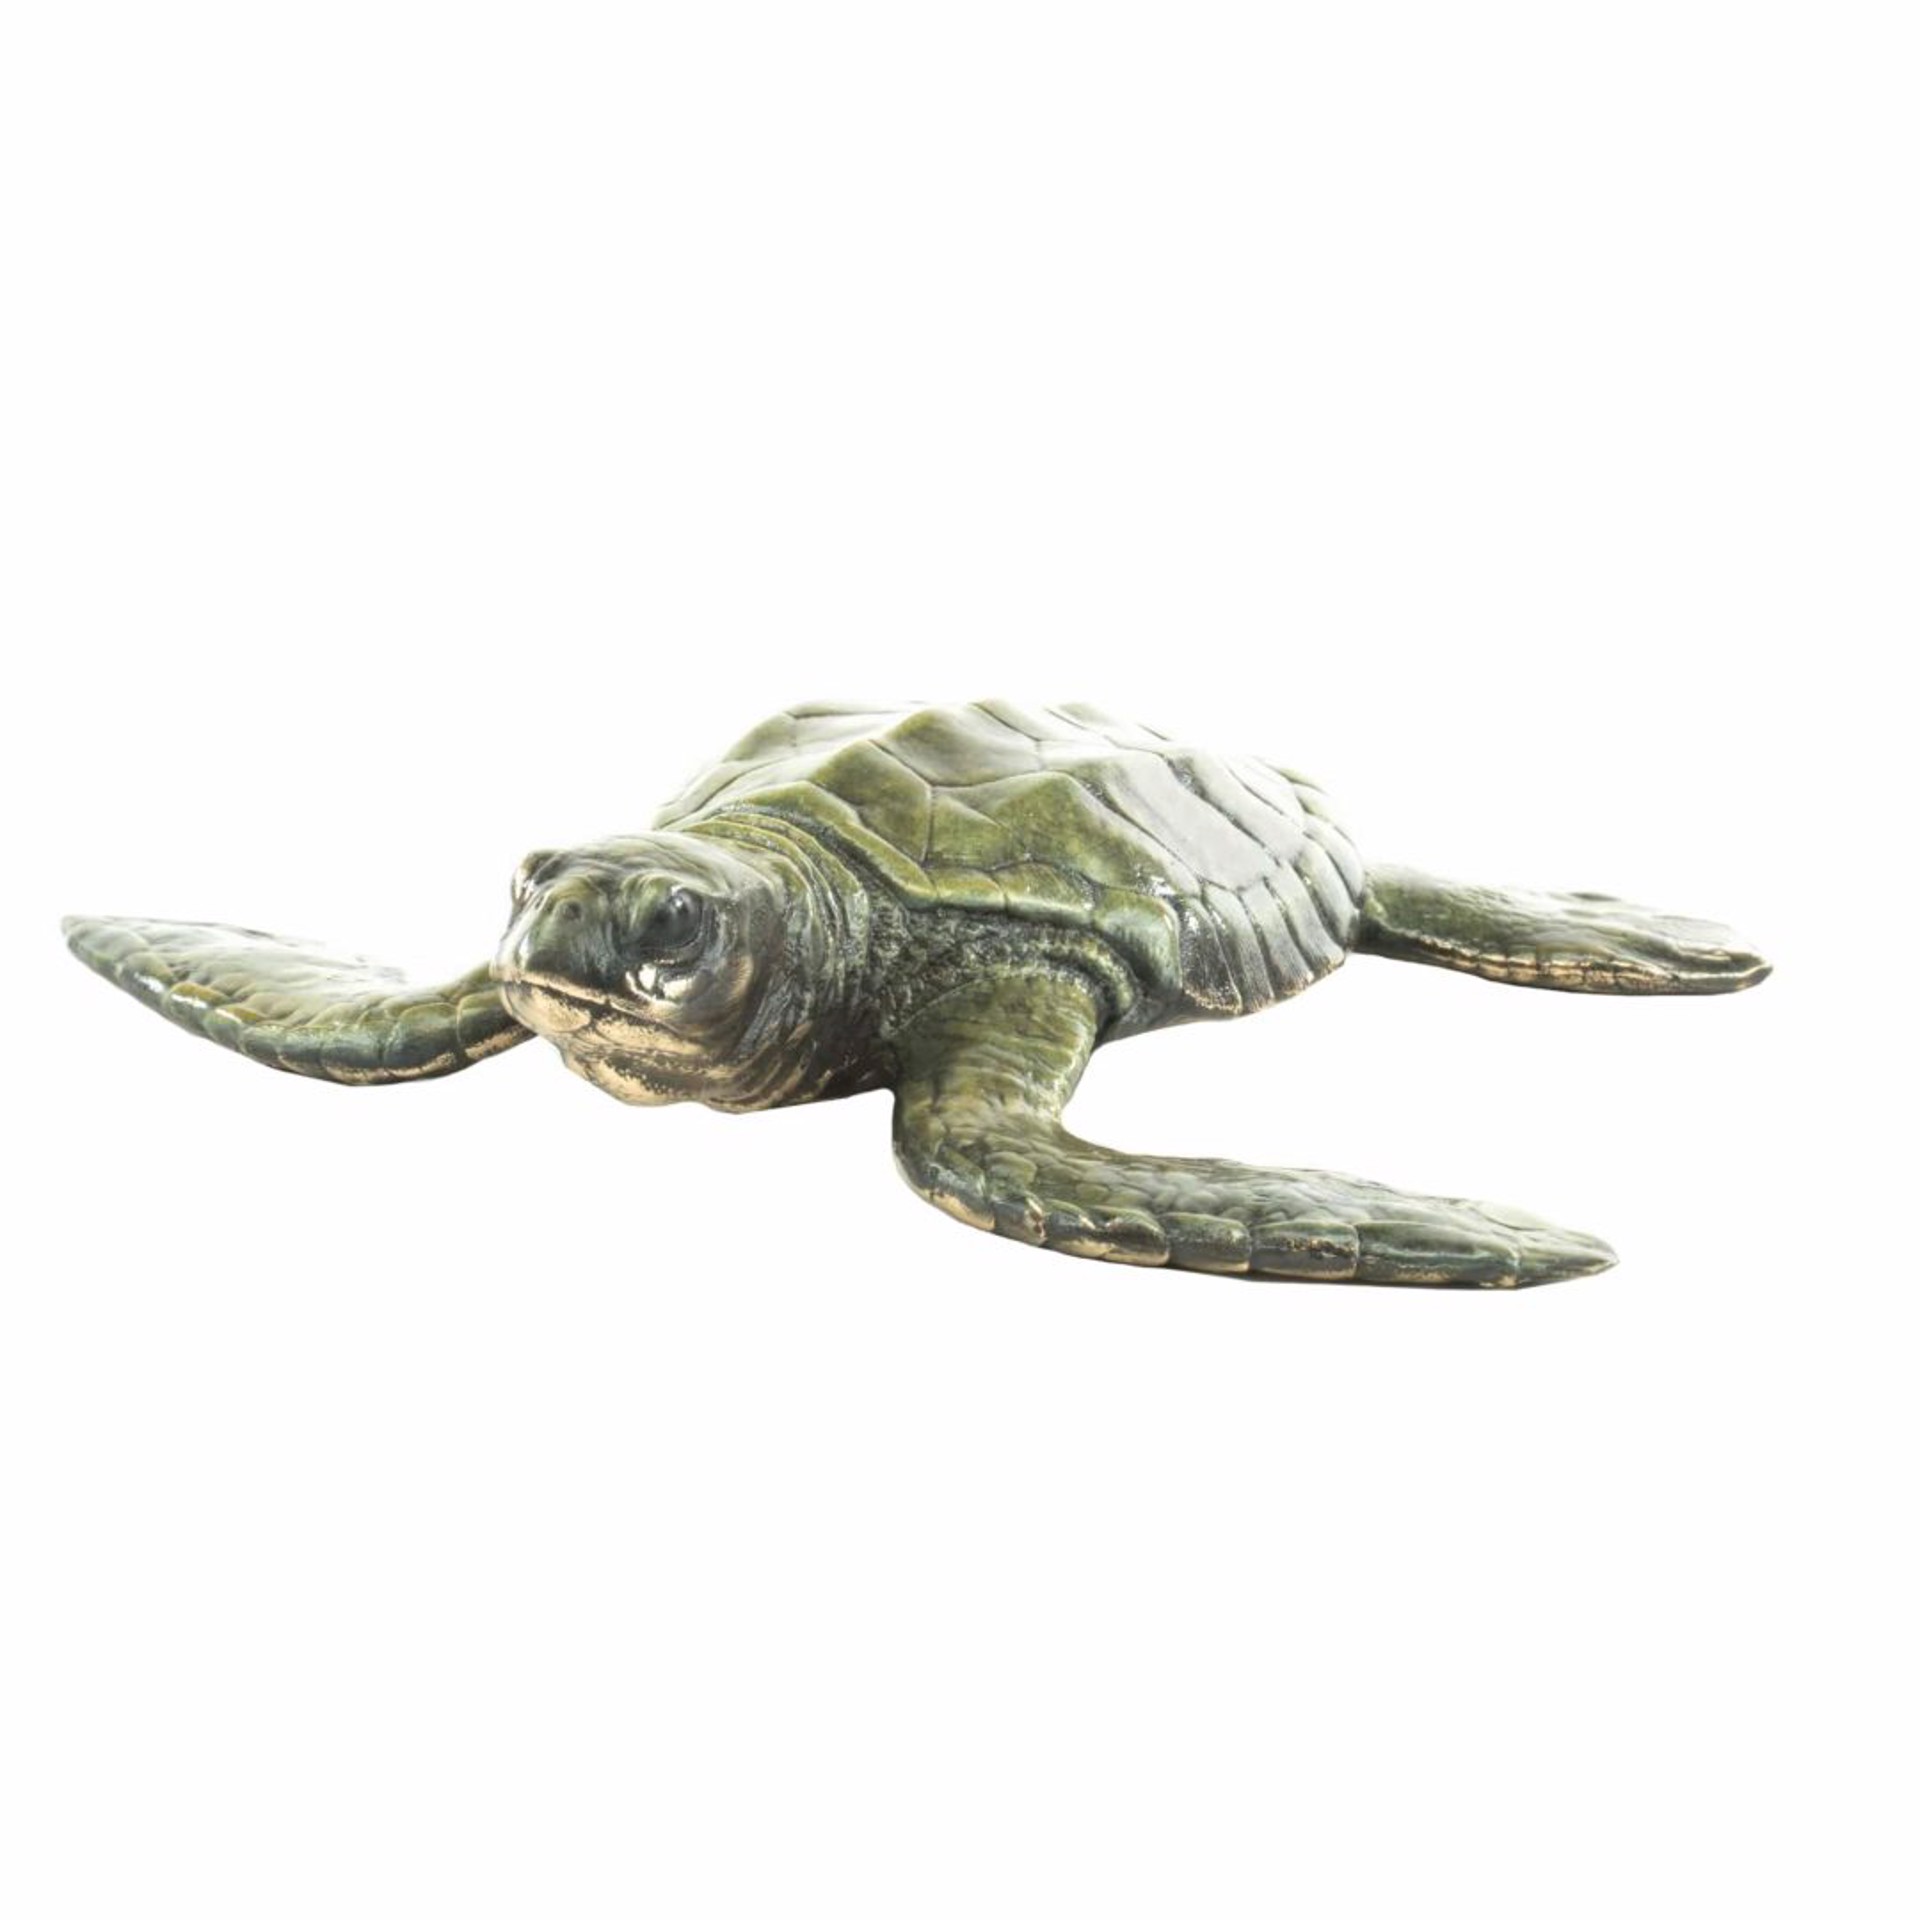 Green Turtle Hatchling Original Bronze Sculpture by Rip and Alison Caswell, Contemporary Fine Art, Modern Wildlife Art, Available At Gallery Wild